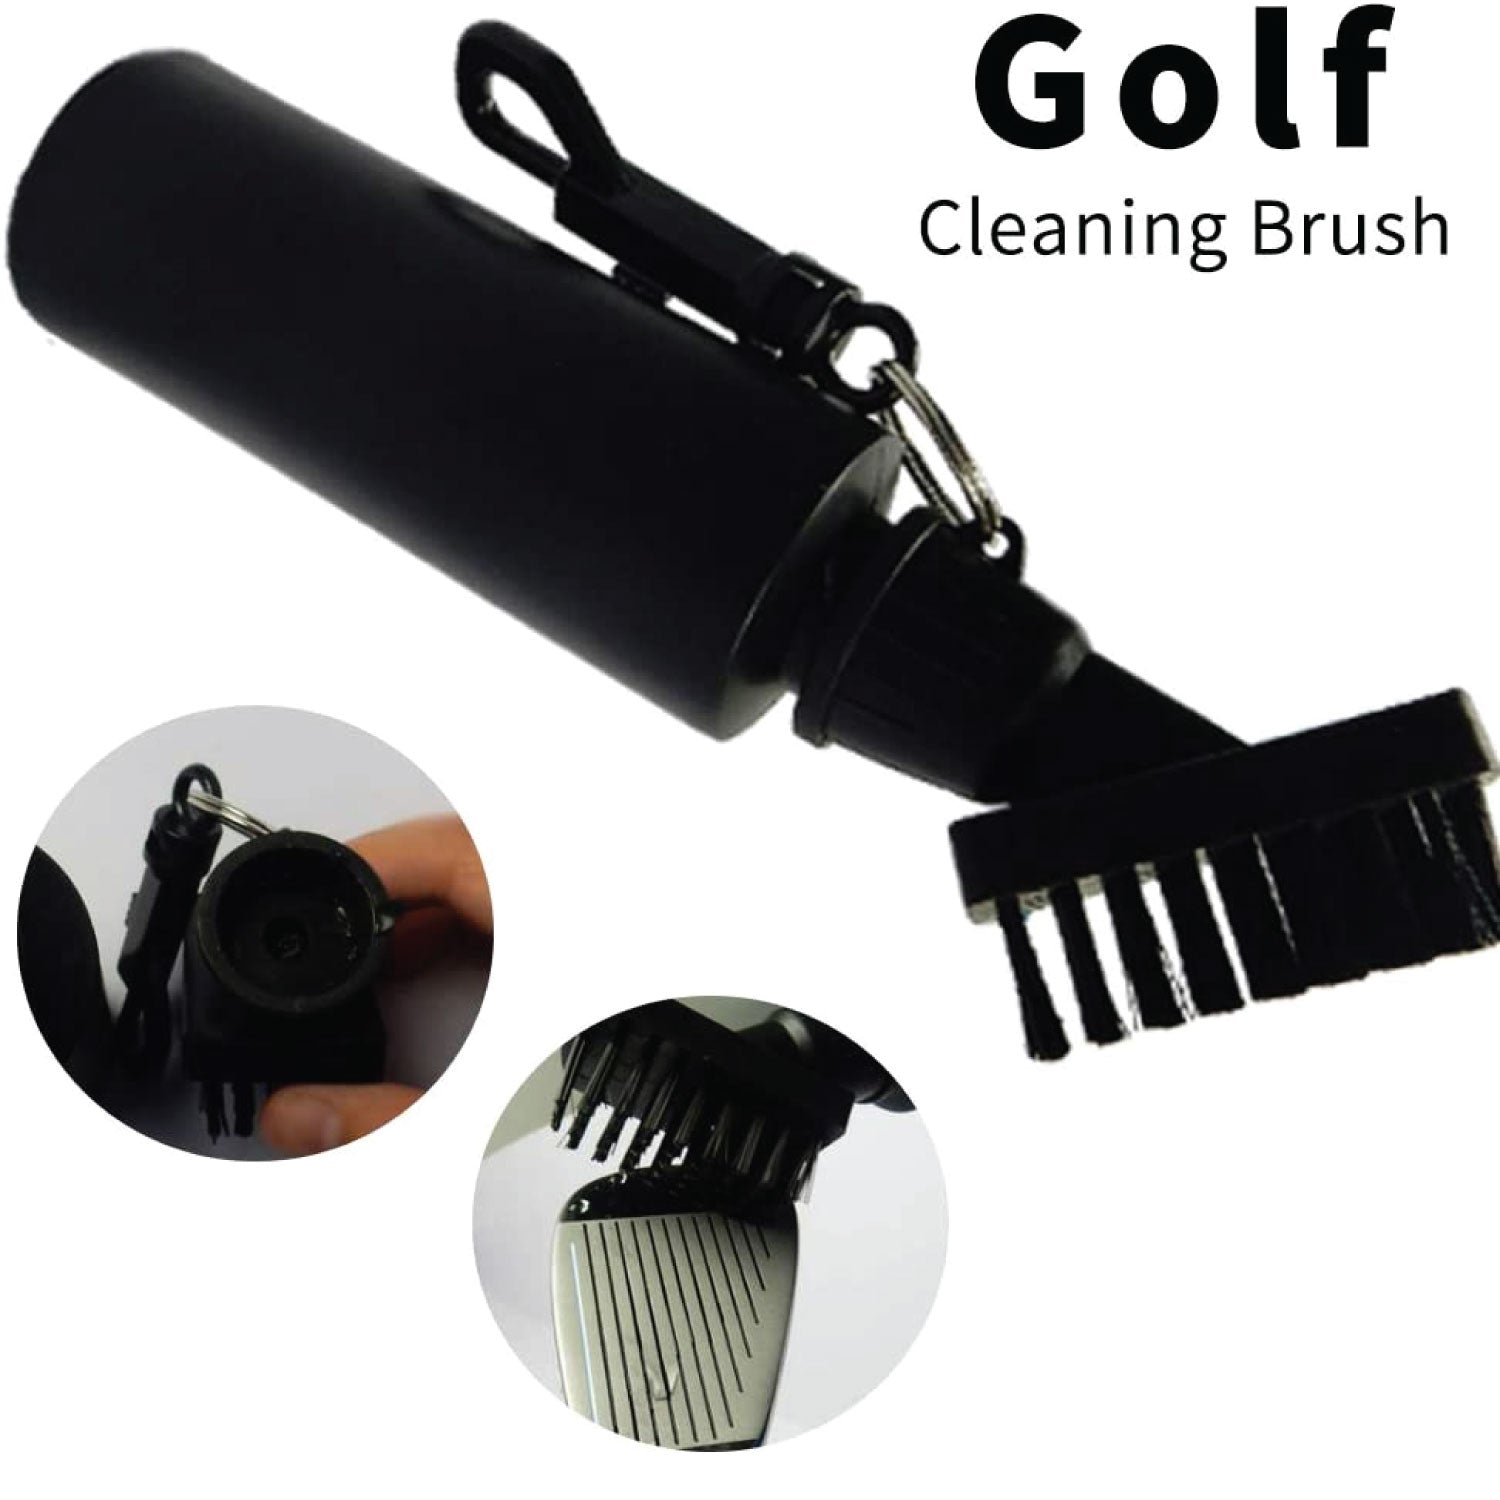 Cleaning Brush for Golf Club 